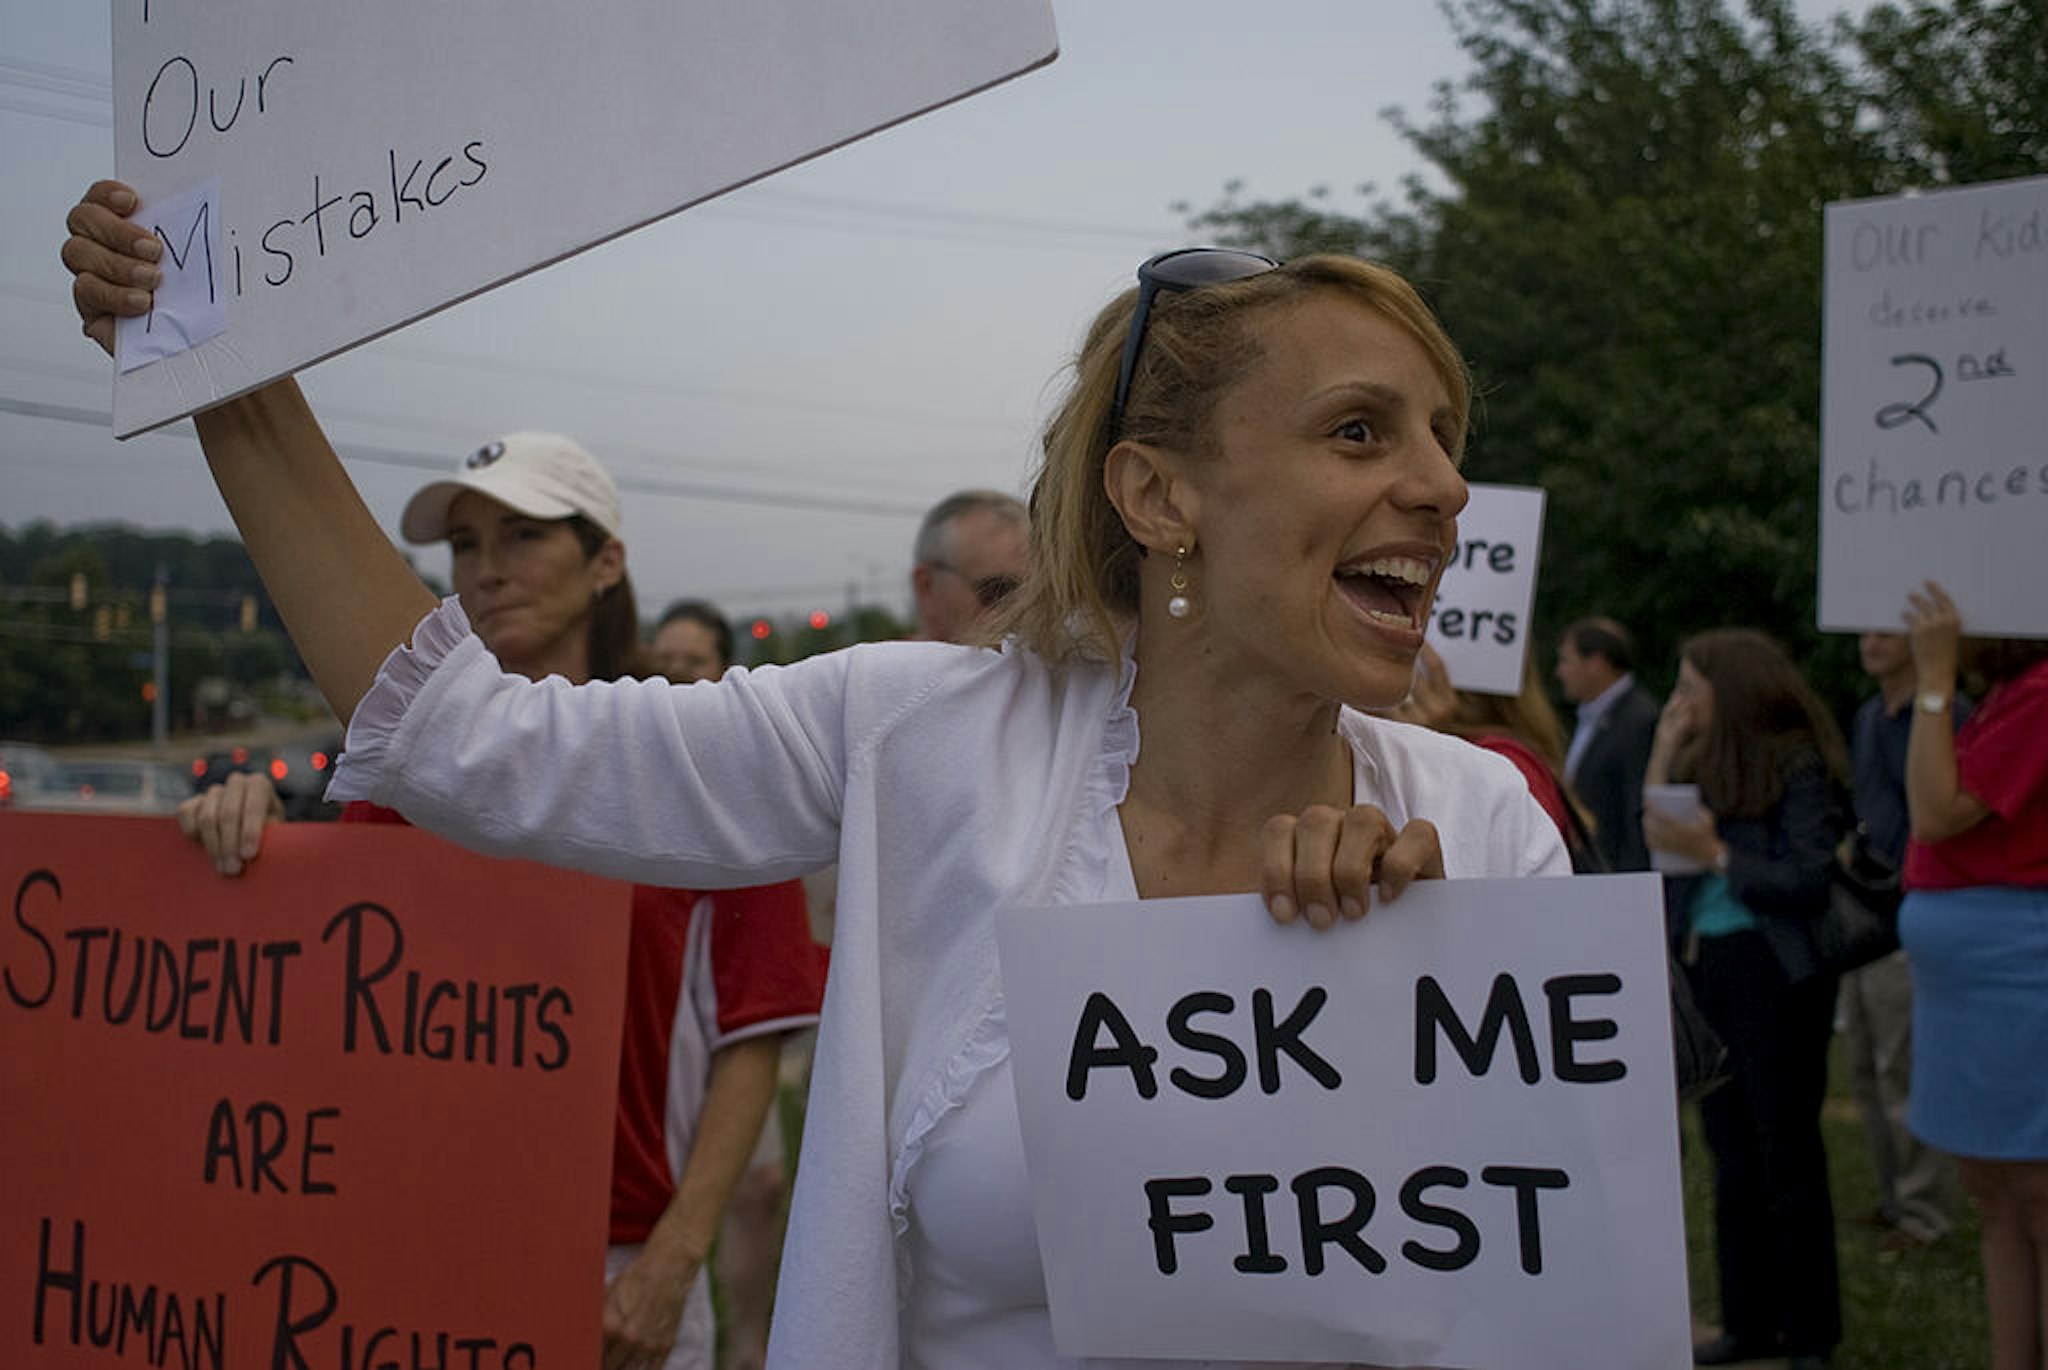 FALLS CHURCH, VA - JUNE 9: Glassman School Board candidate at large Charisse Espy protests against violation of student rights with other parents outside Luther Jackson Middle School on June 9, 2011.